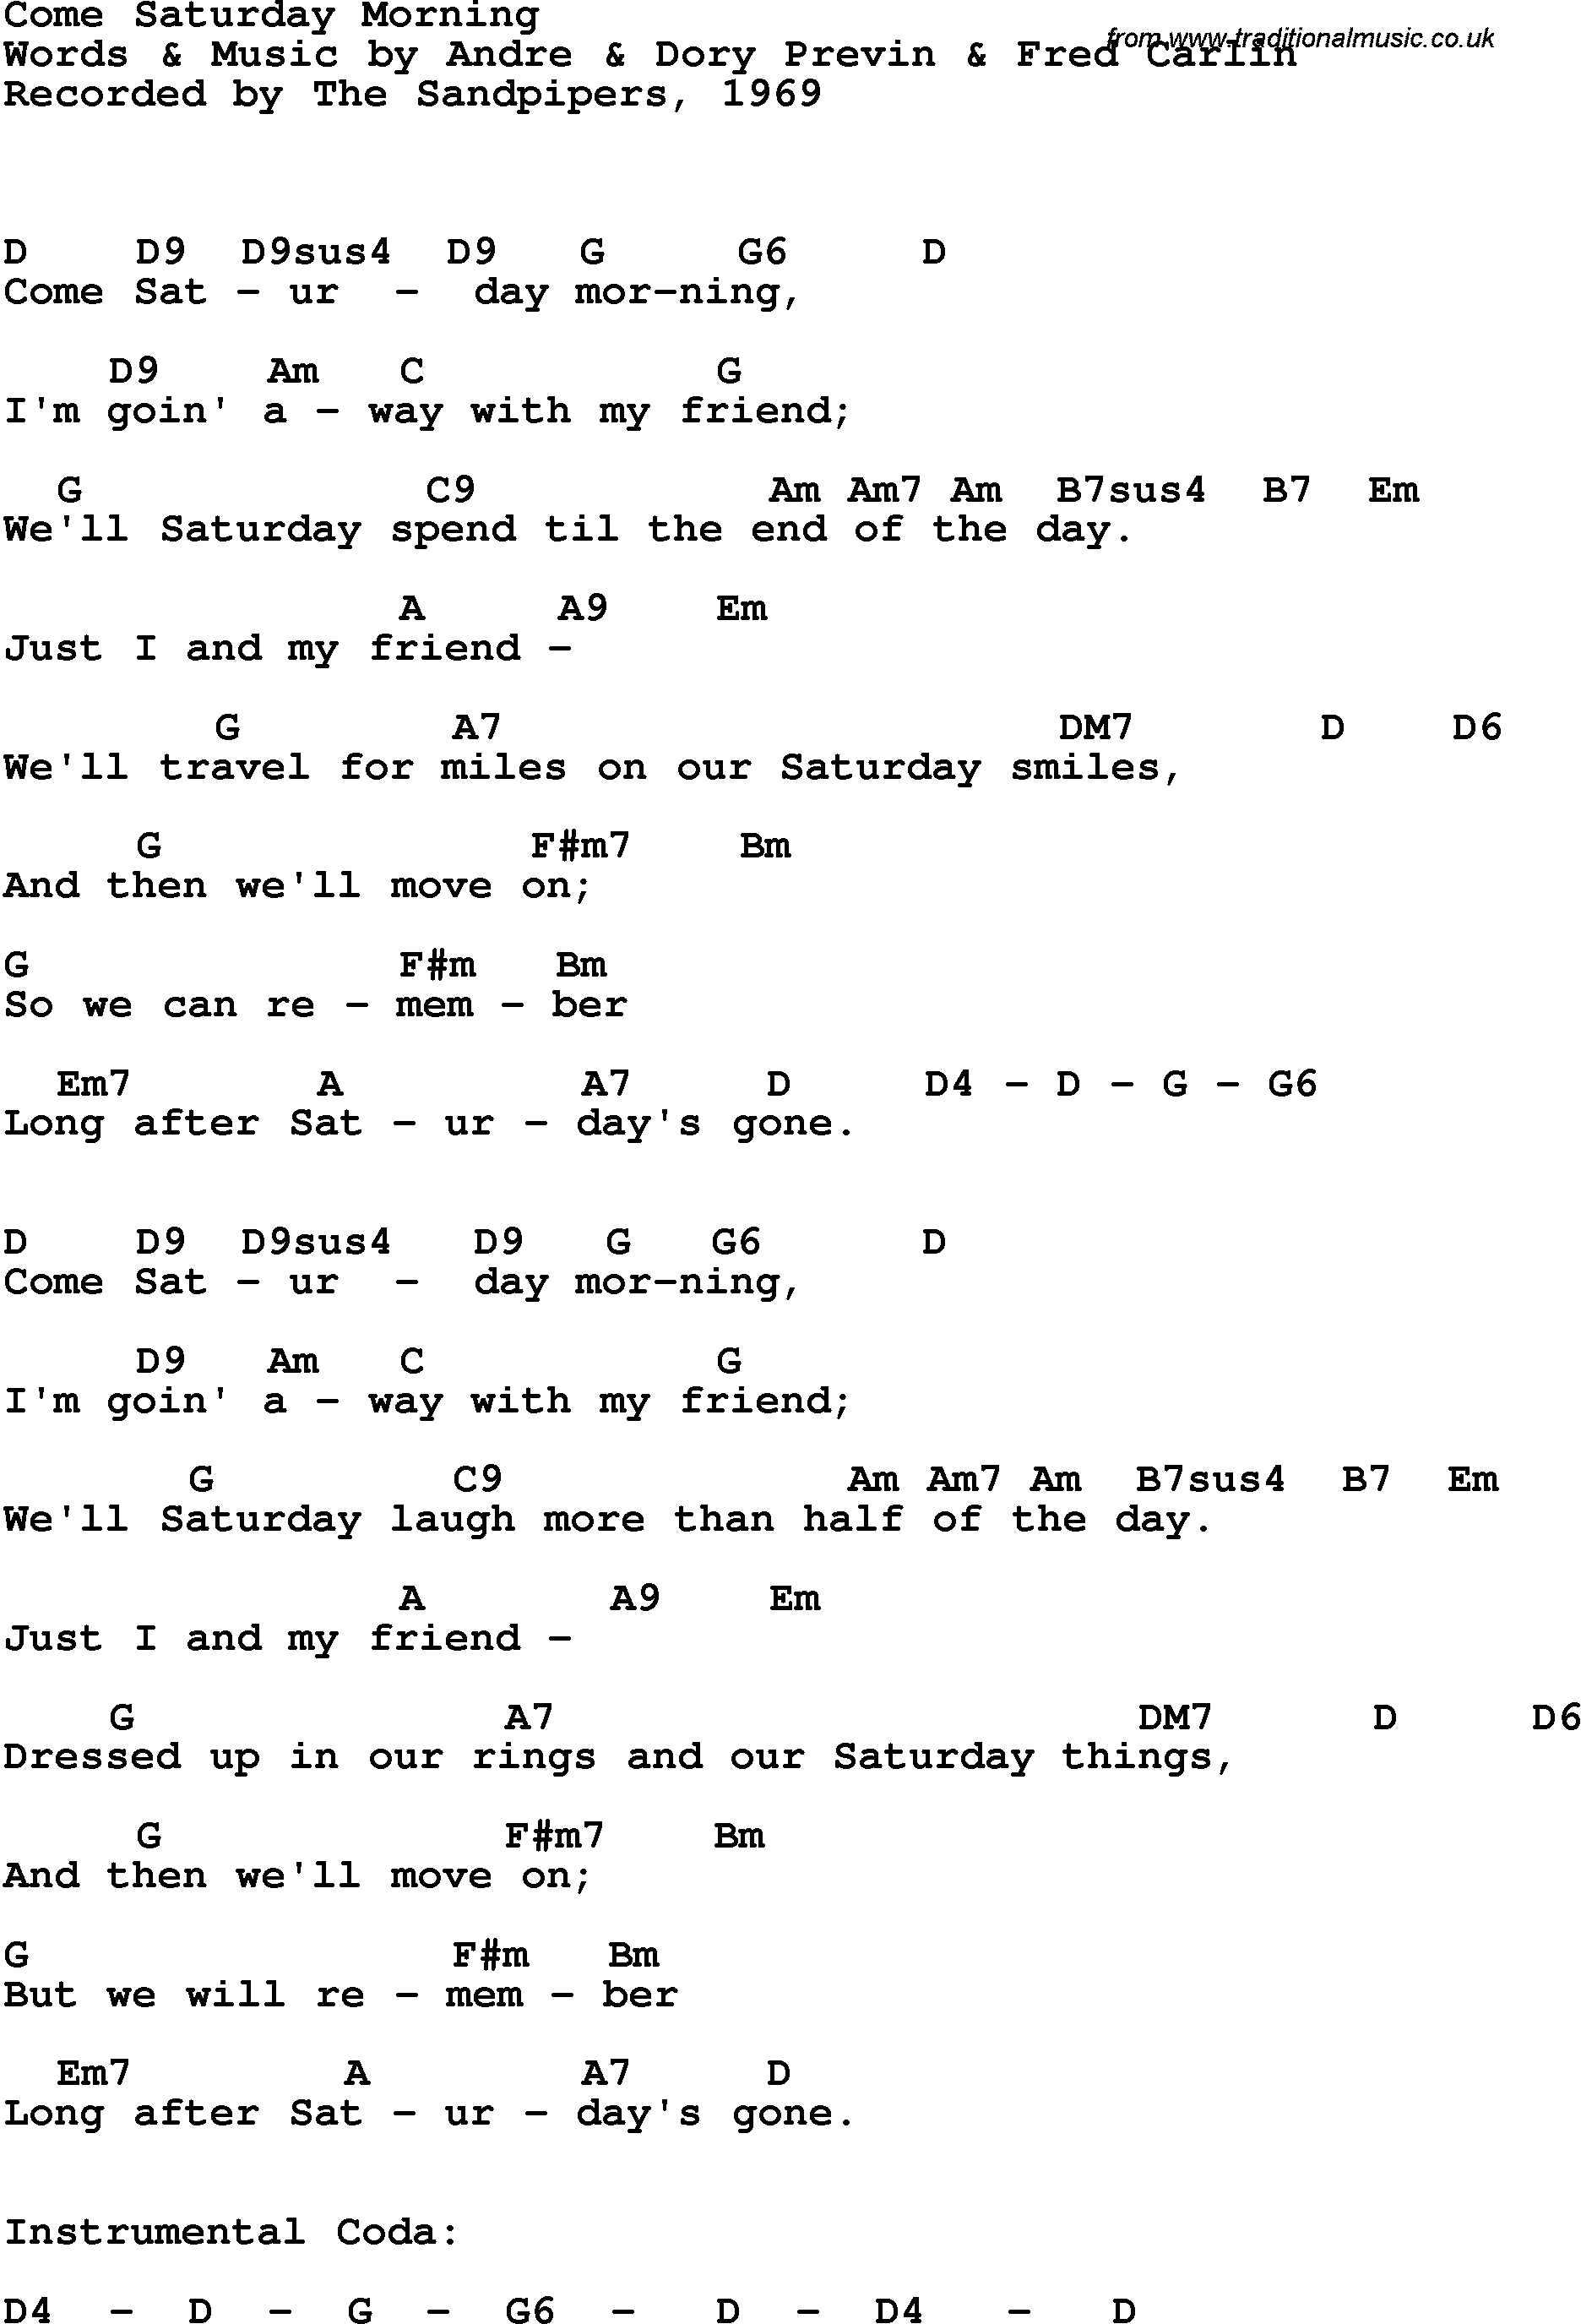 Song Lyrics with guitar chords for Come Saturday Morning - The Sandpipers, 1969